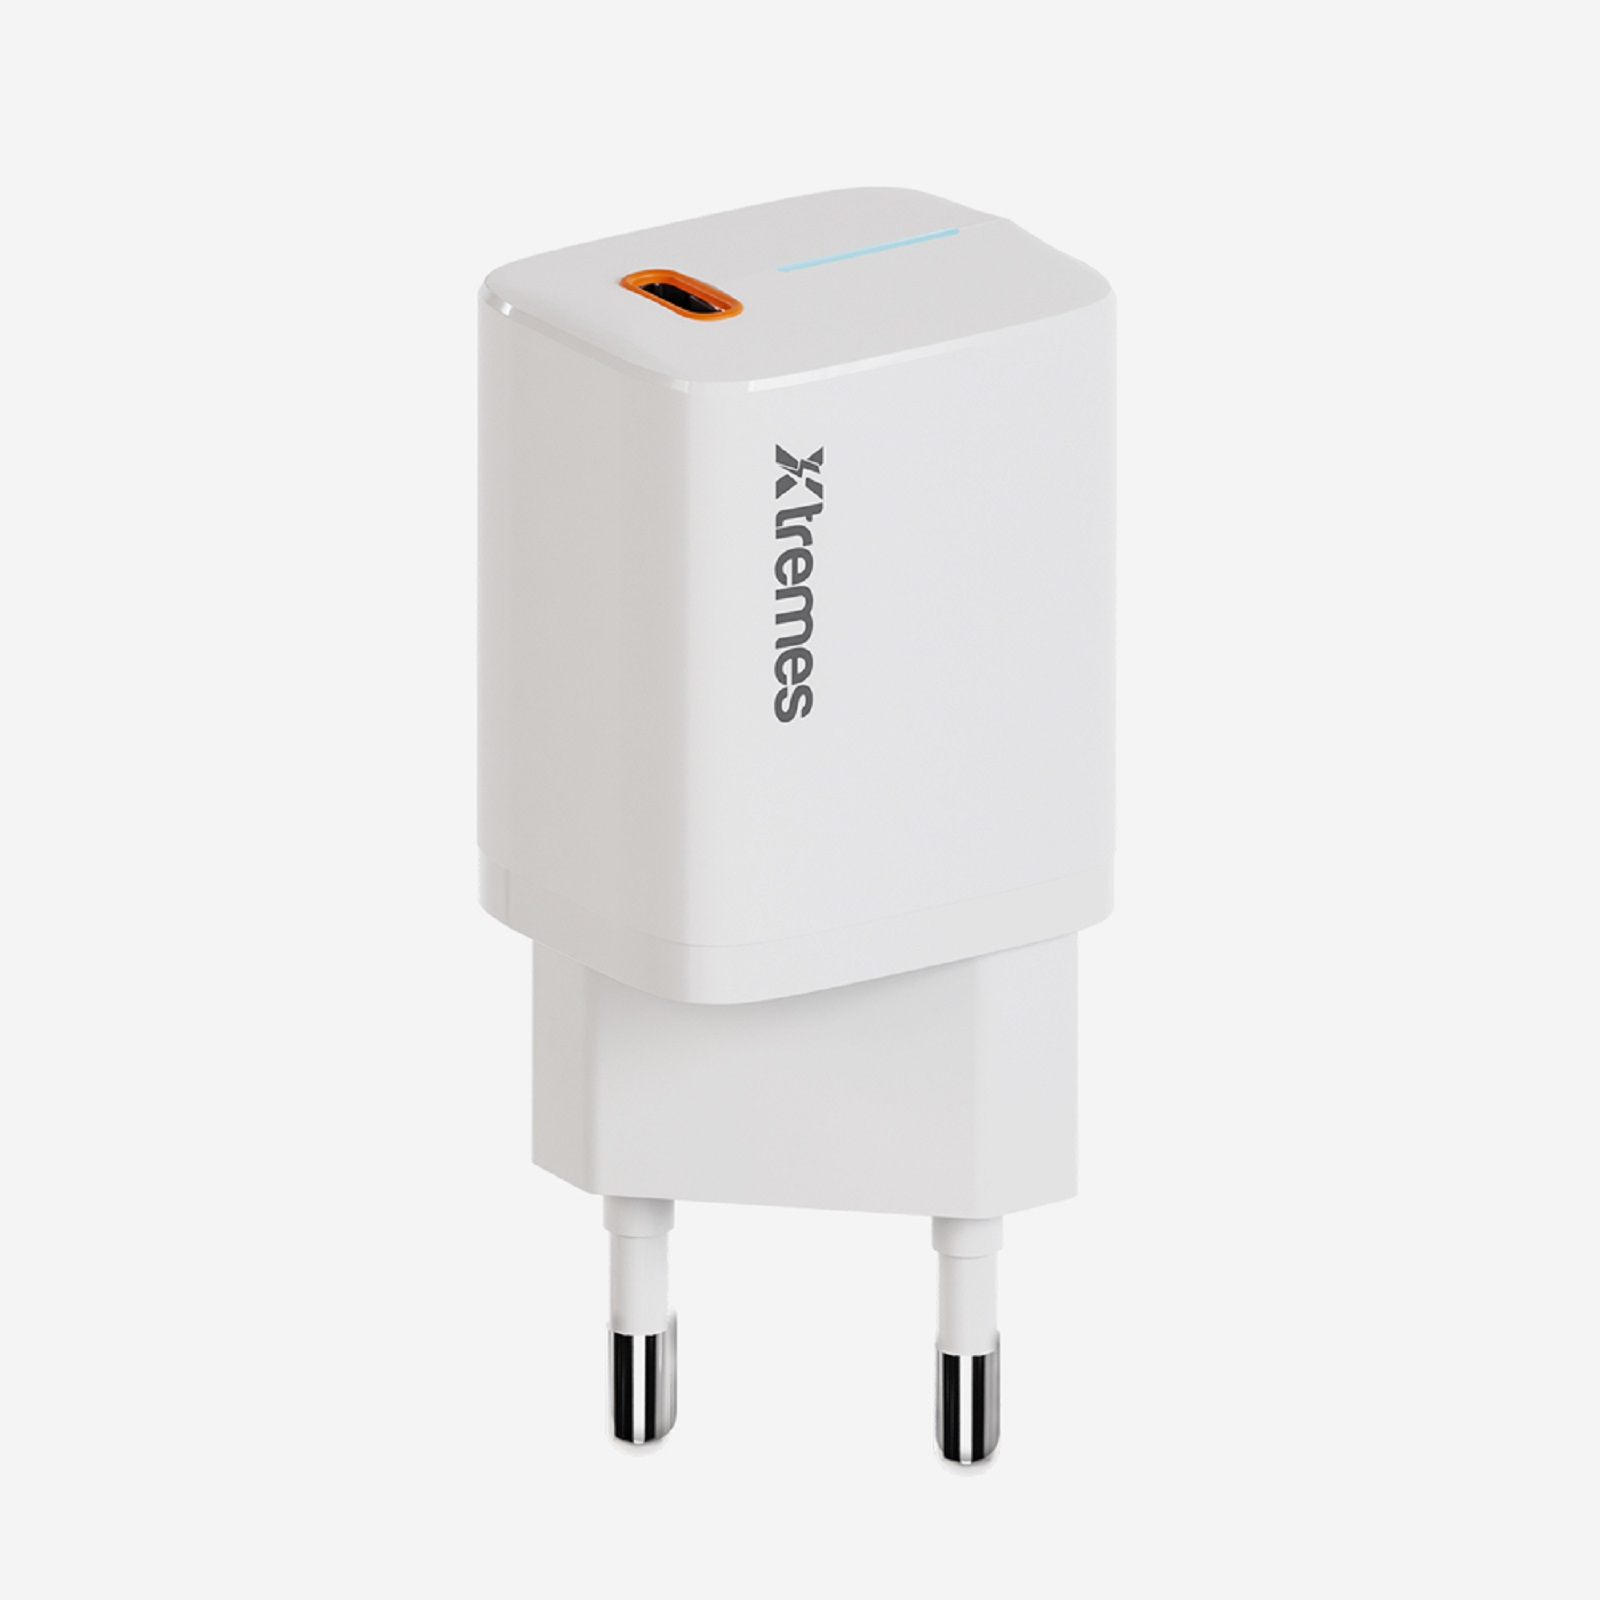 XTREMES Fast Charger (GC08) PD iPhone, Redmi, Ladegerät-Adapter Samsung, Handys, Xiaomi, Apple, Tablets, 20W 3.0 (ohne White Smartwatches, Kabel)